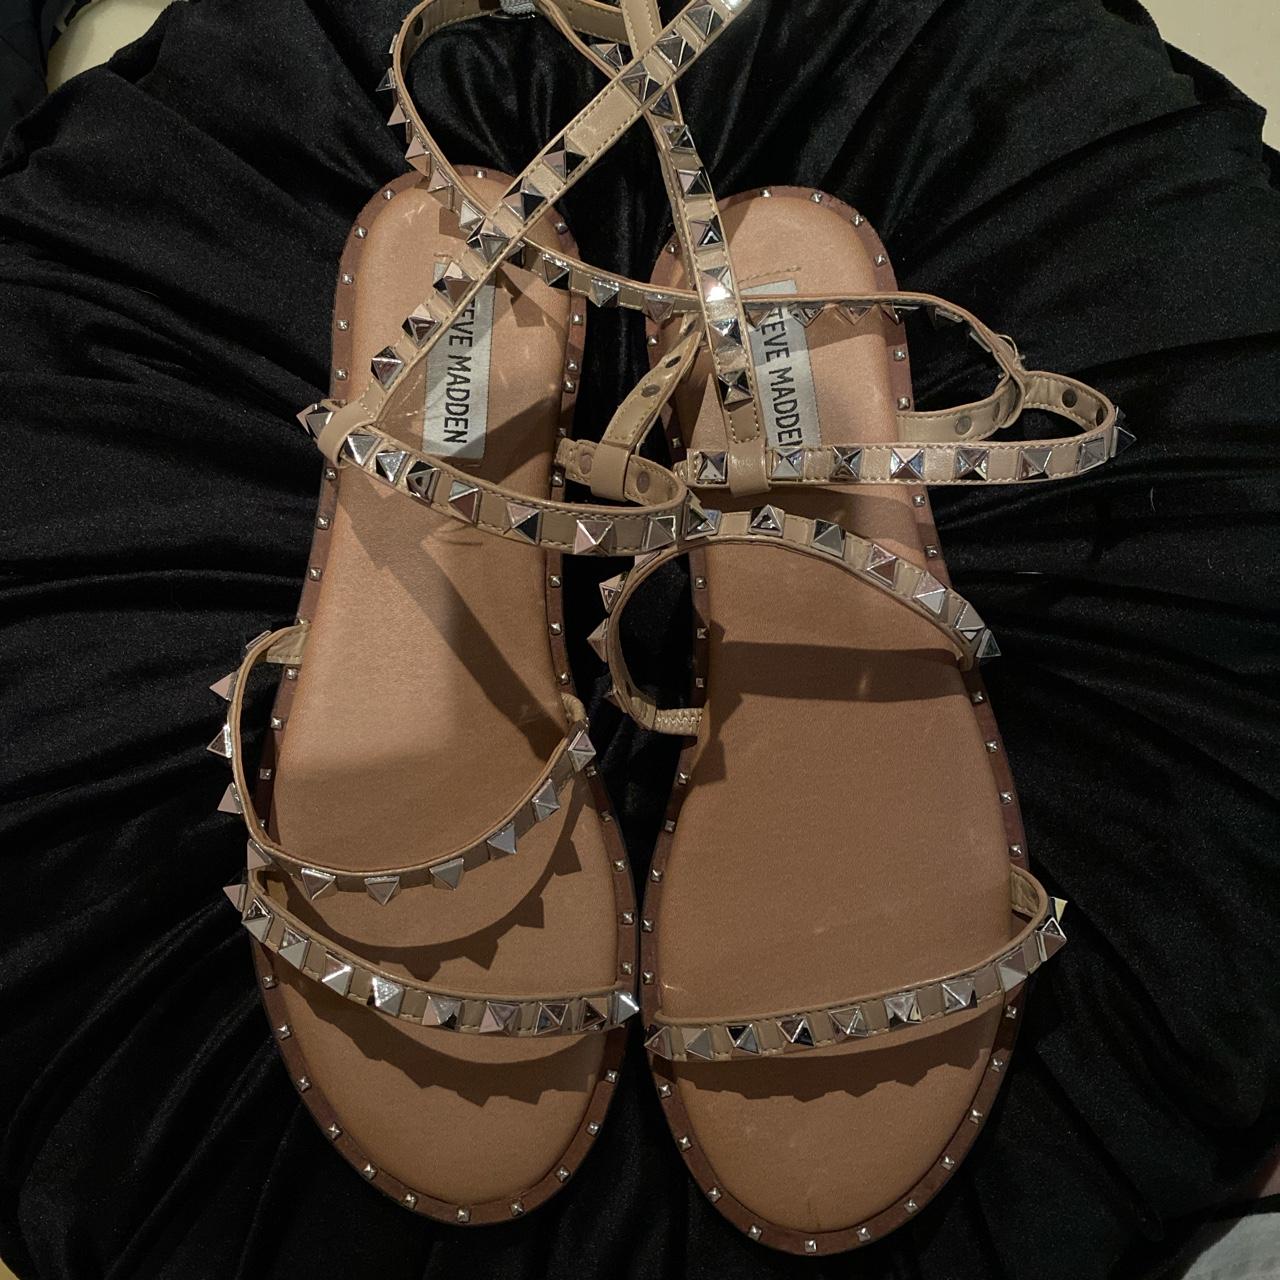 Steve Madden Travel Tan Sandals + Floral Dresses Review + Weekend Sales |  Outfit inspiration spring, Stylish petite, Maternity clothes